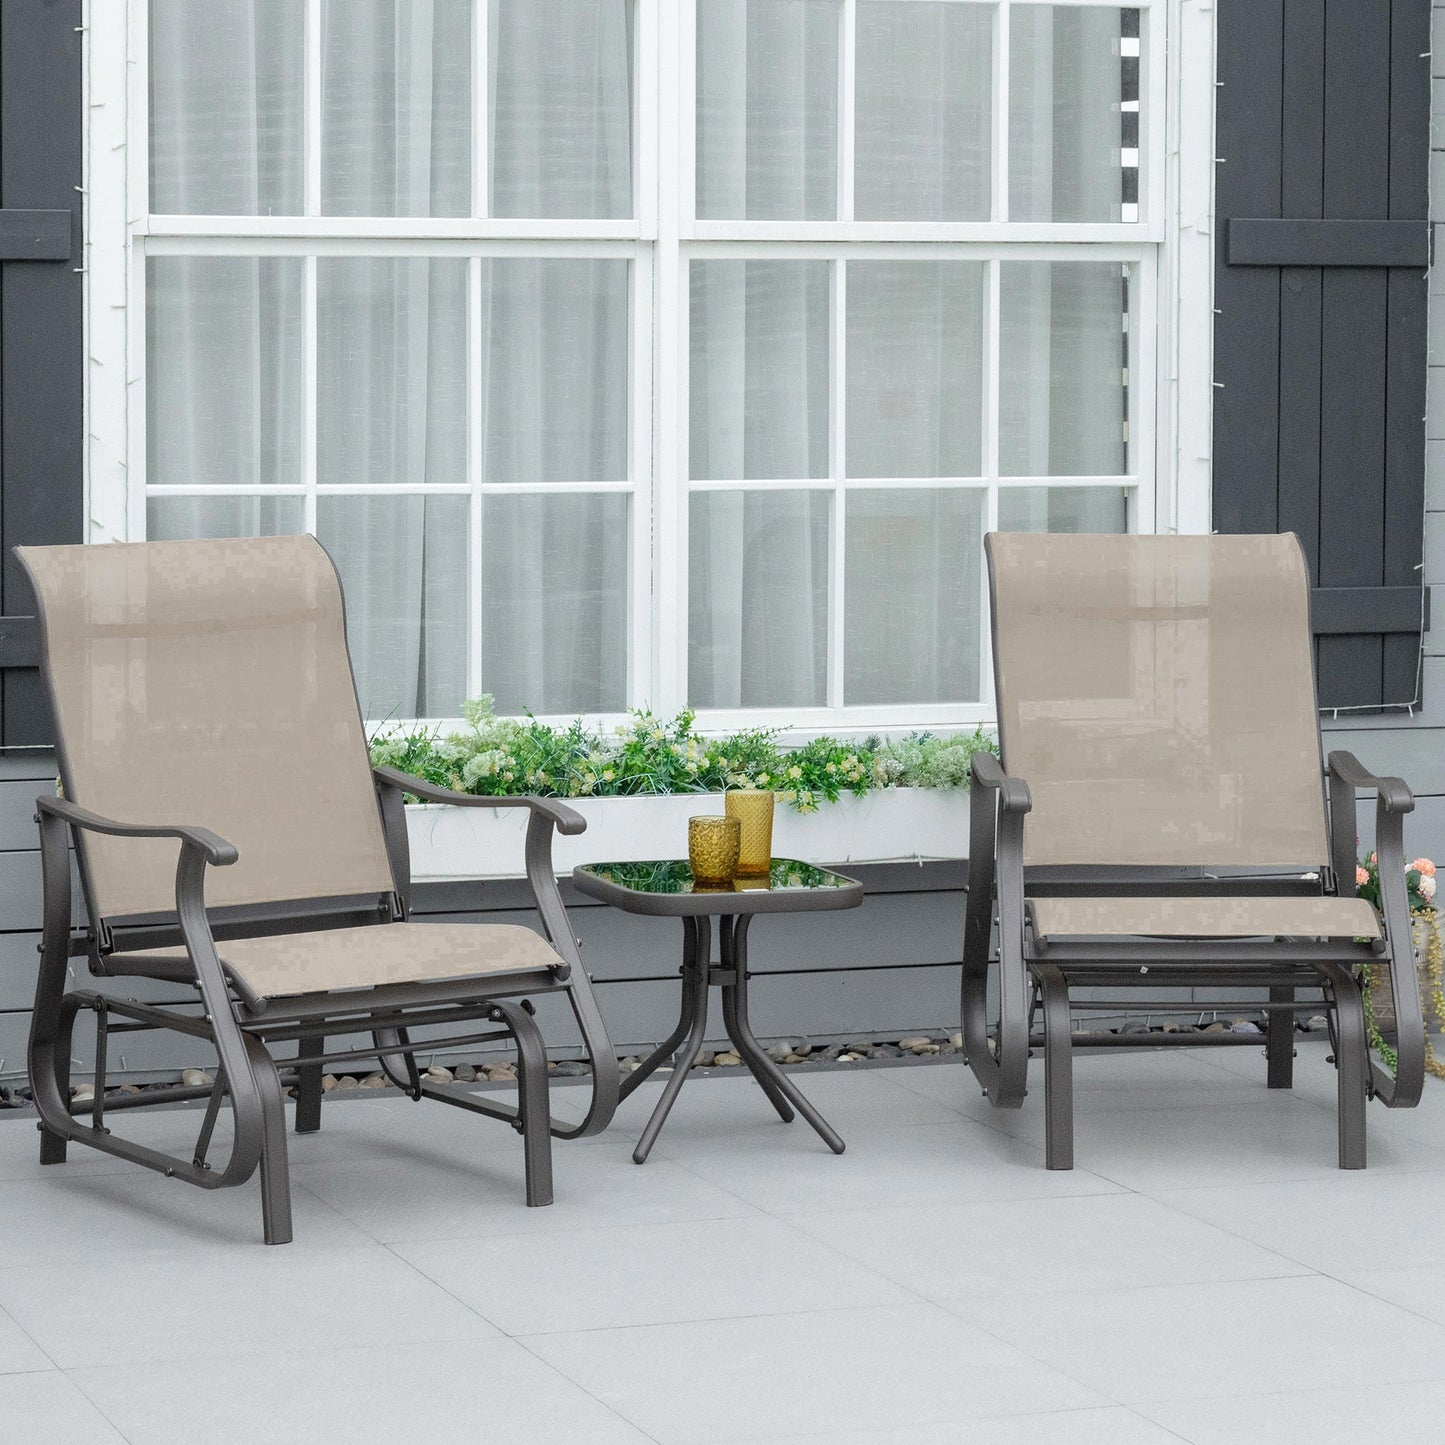 Outdoor and Garden-3-Piece Gliding Chair & Tea Table Set, Outdoor 2 Rocker Seats with Steel Frame, Tempered Glass Tabletop, Garden Patio Furniture, Grey - Outdoor Style Company